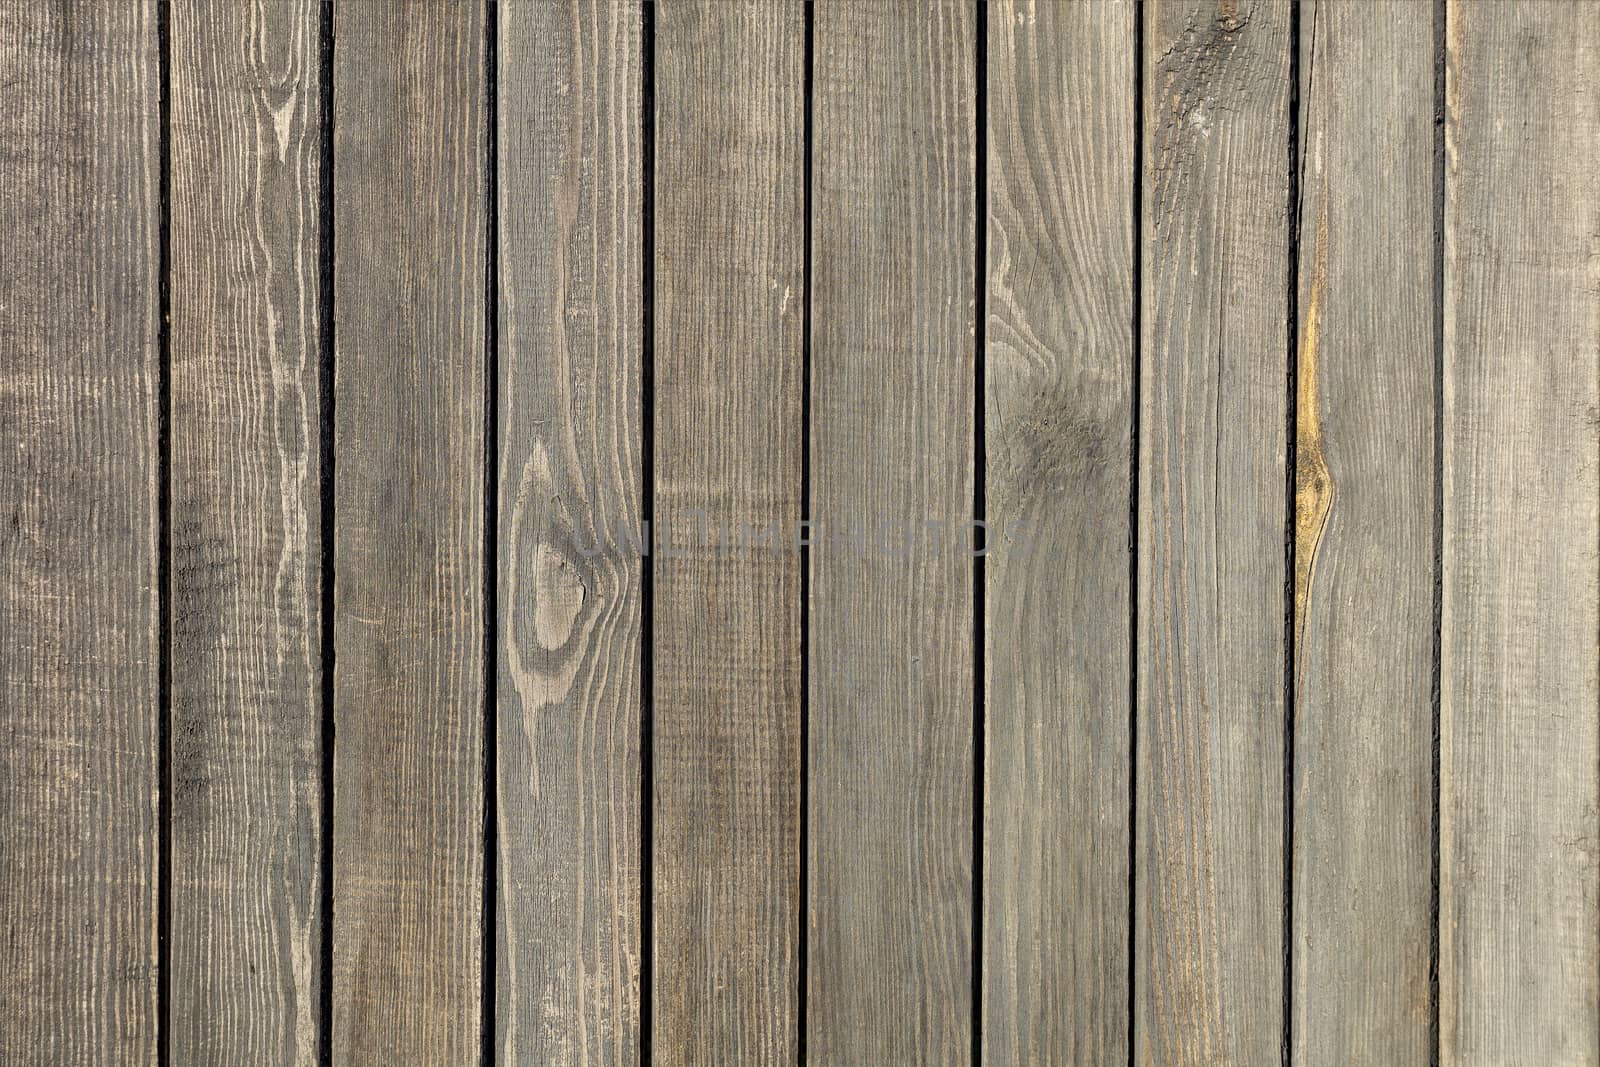 Weathered old gray wooden fence close-up. by Sergii